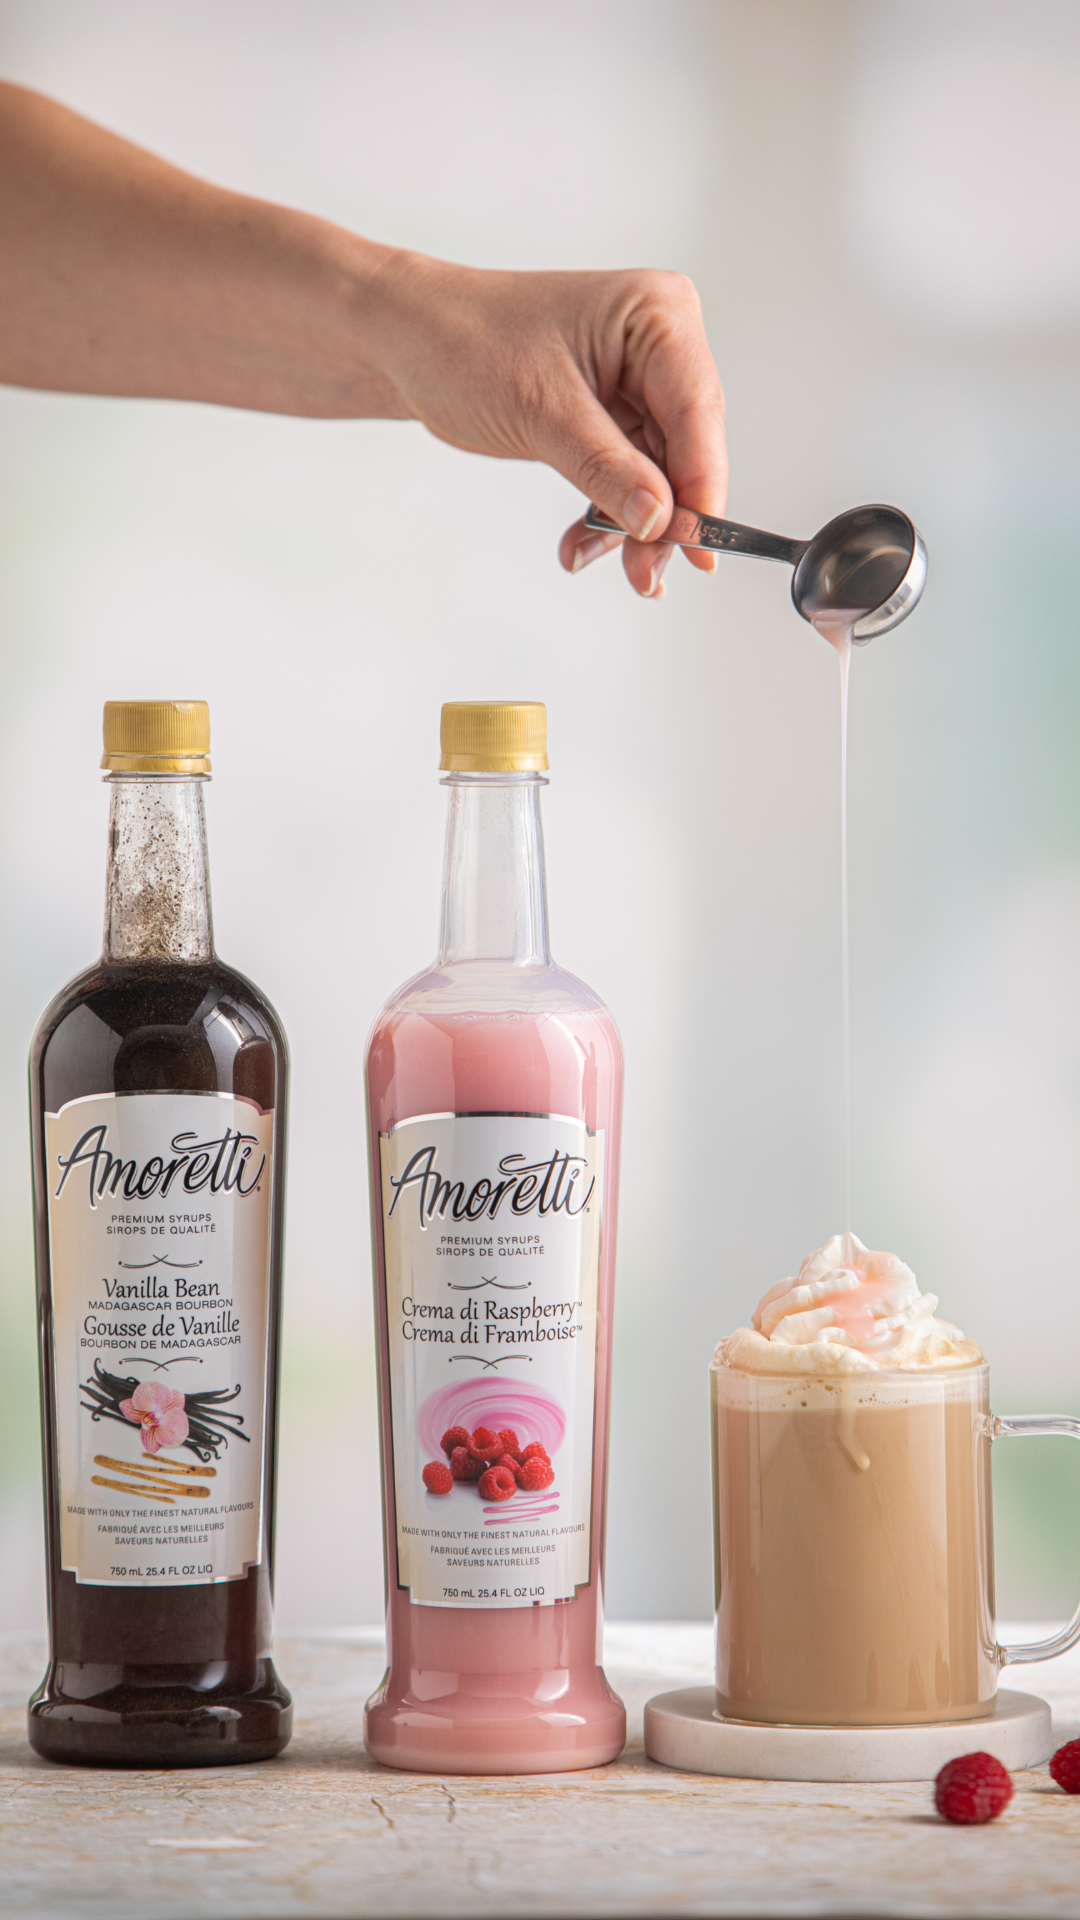 Amoretti Crema di Raspberry being drizzled on top of a Raspberries and Cream Latte